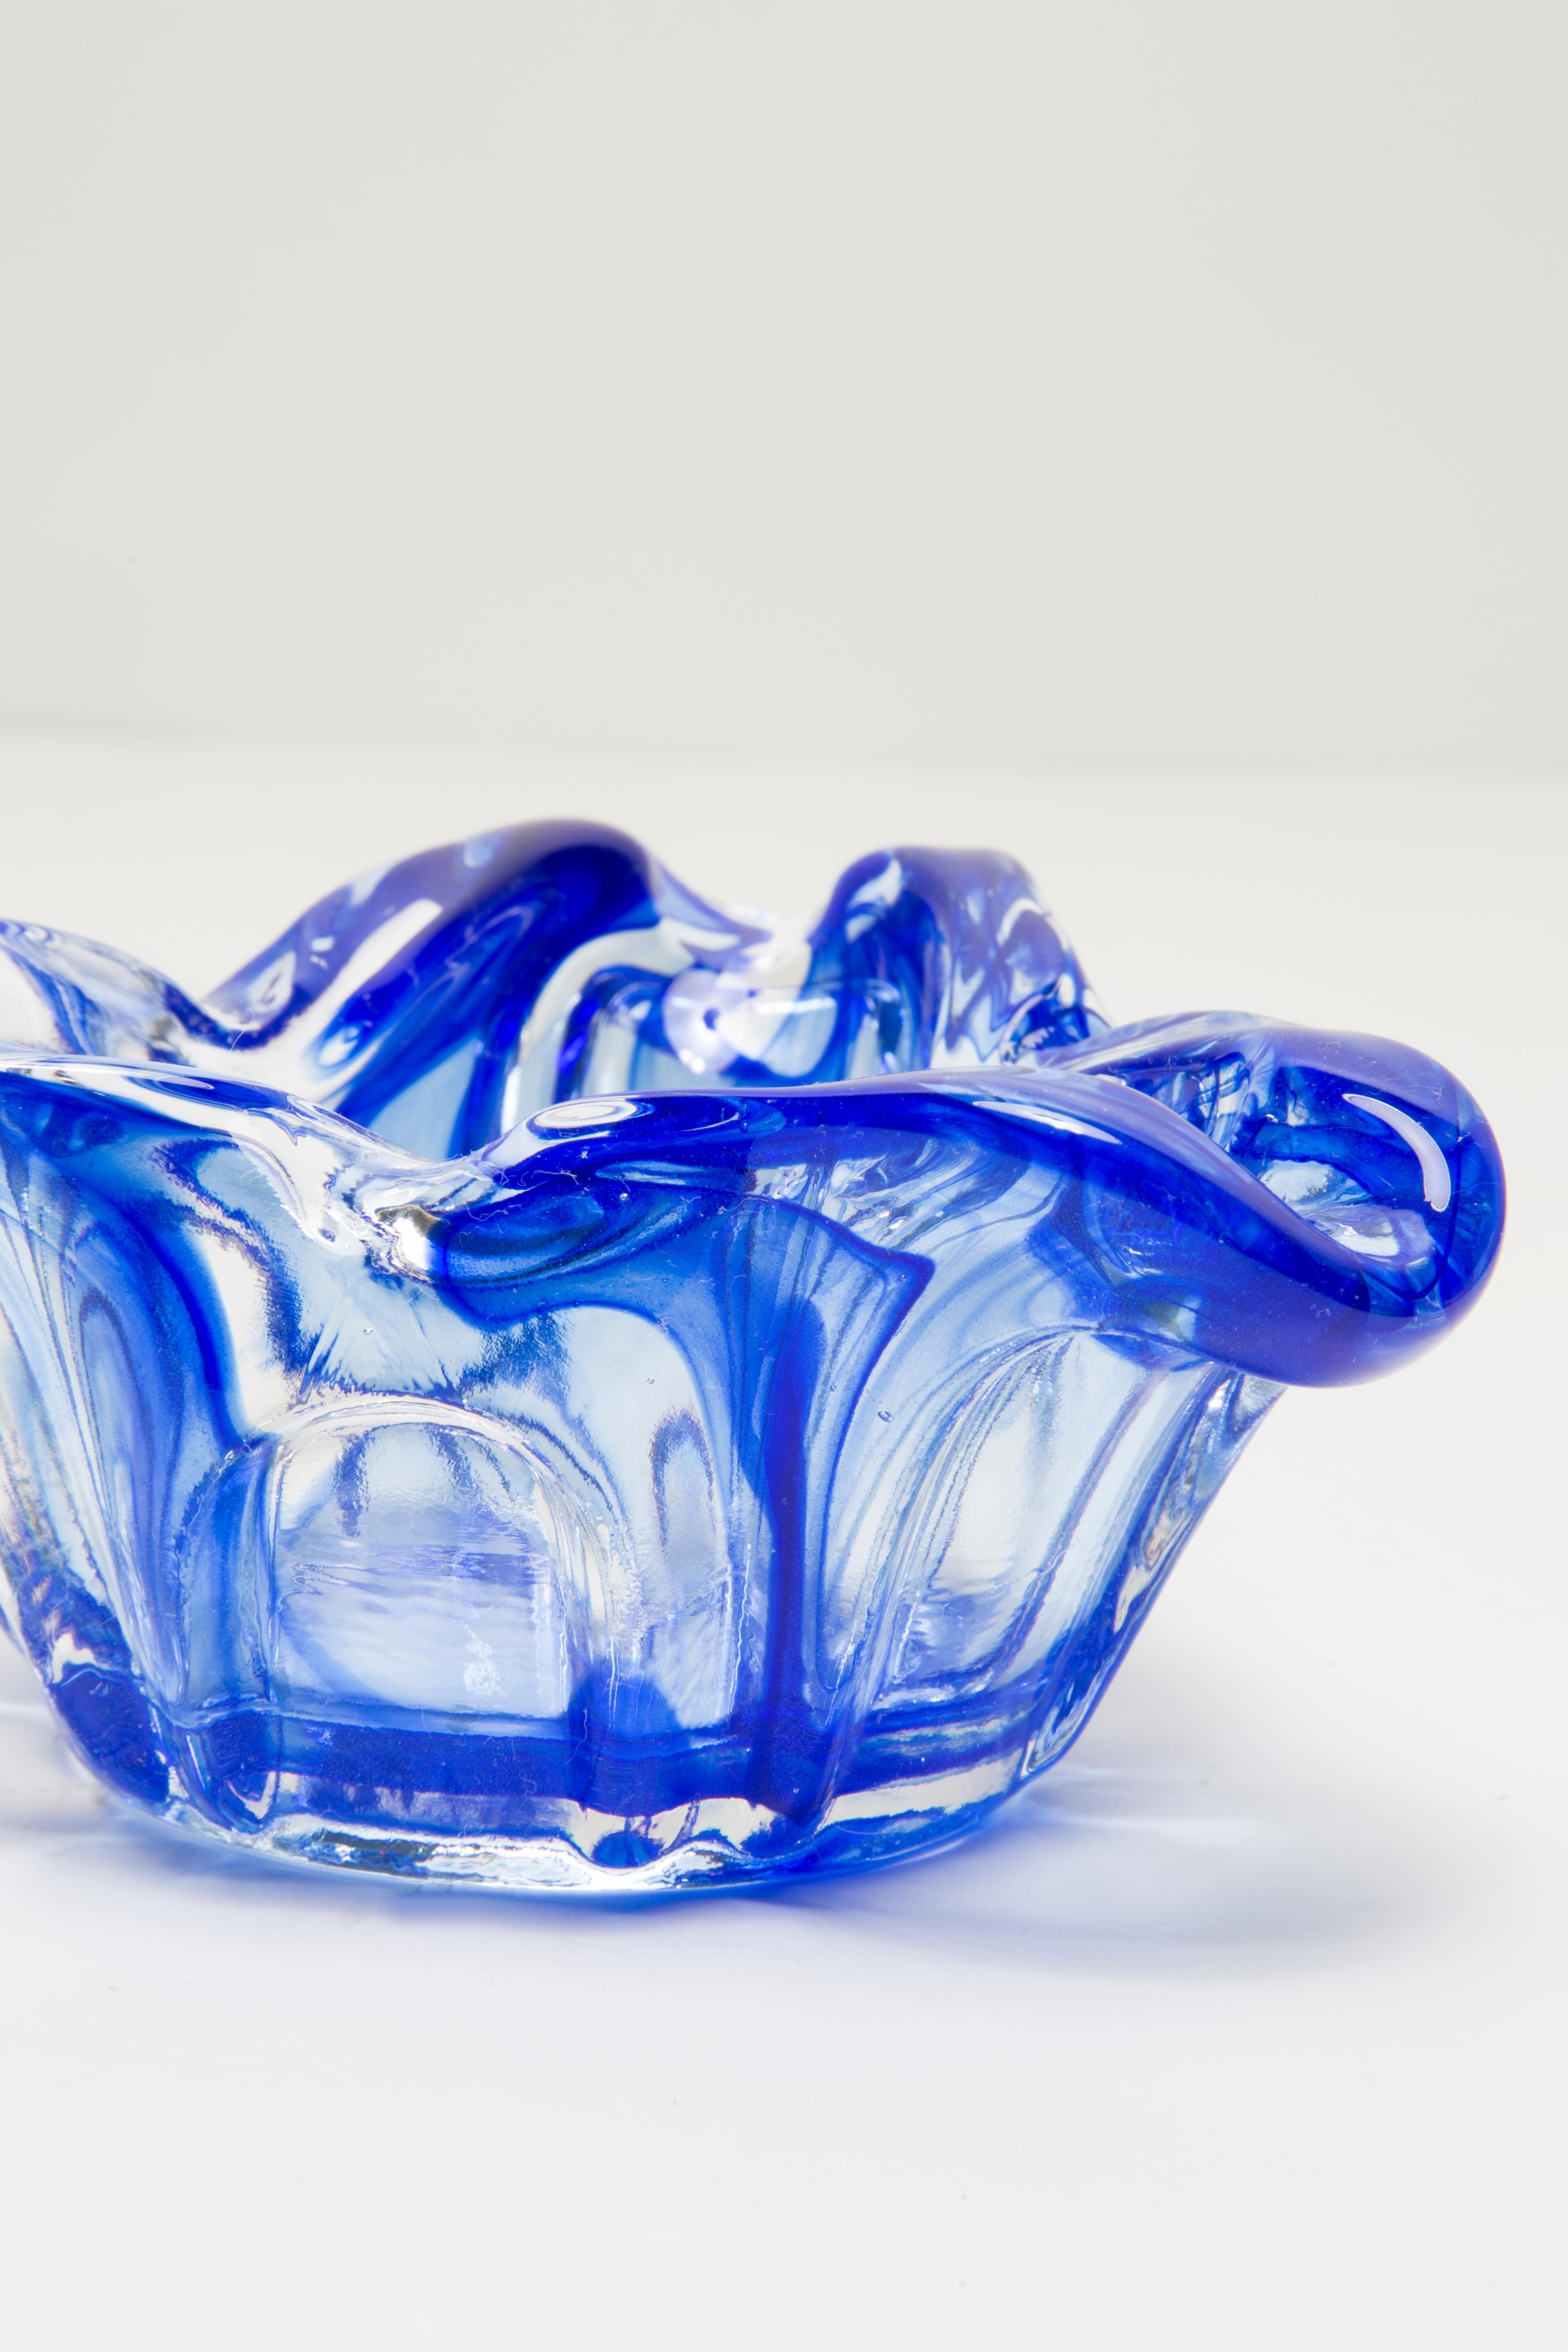 Mid Century Crystal Blue Artistic Glass Ashtray Bowl, Italy, 1970s For Sale 7